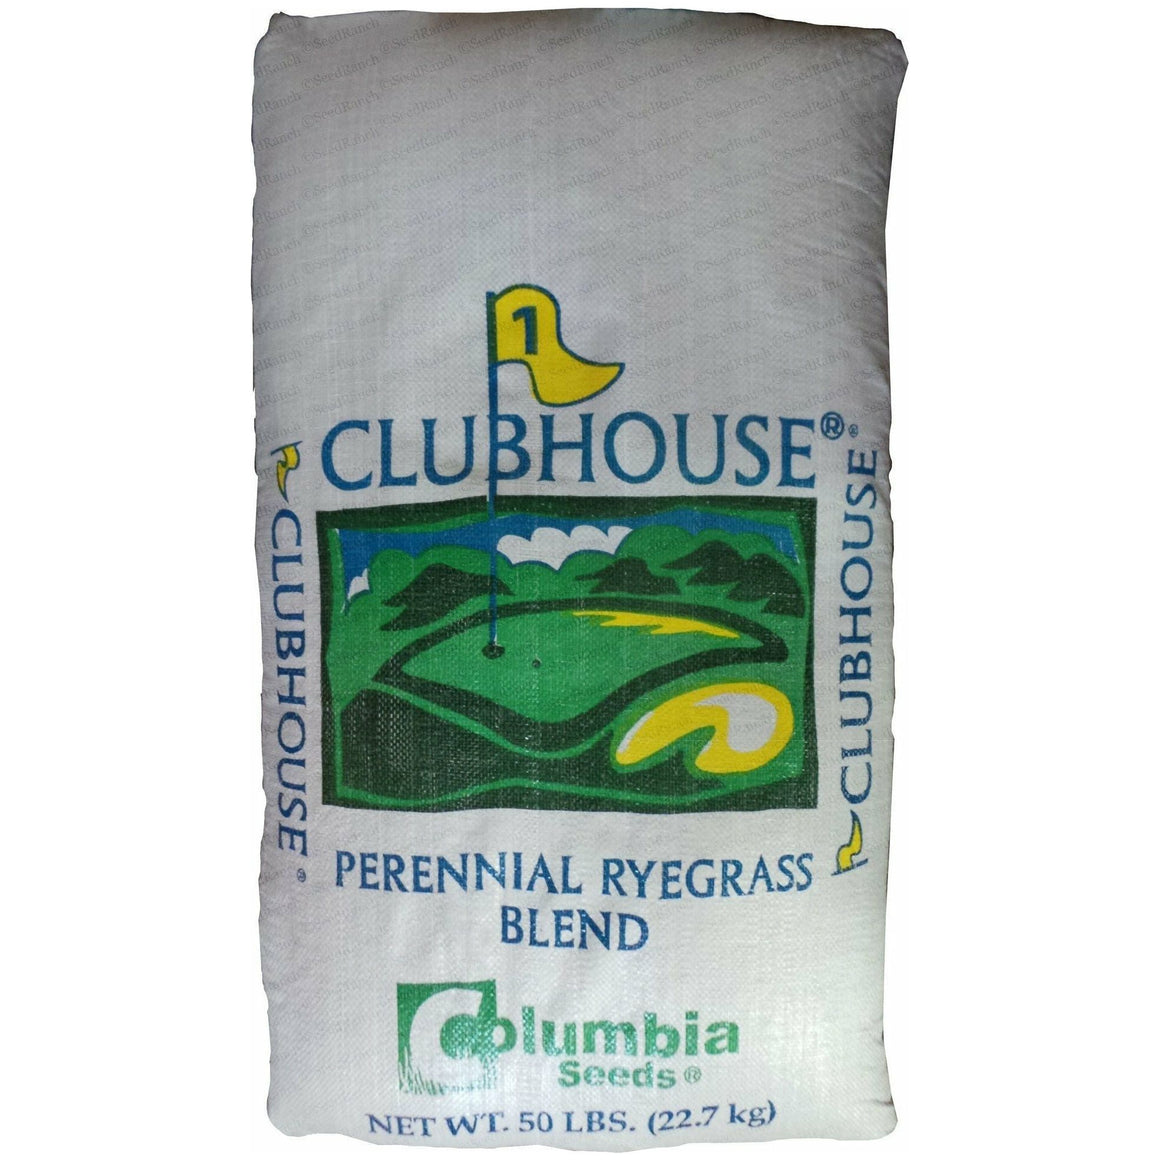 Clubhouse Perennial Ryegrass Seed - 1 Lb. - Seed World